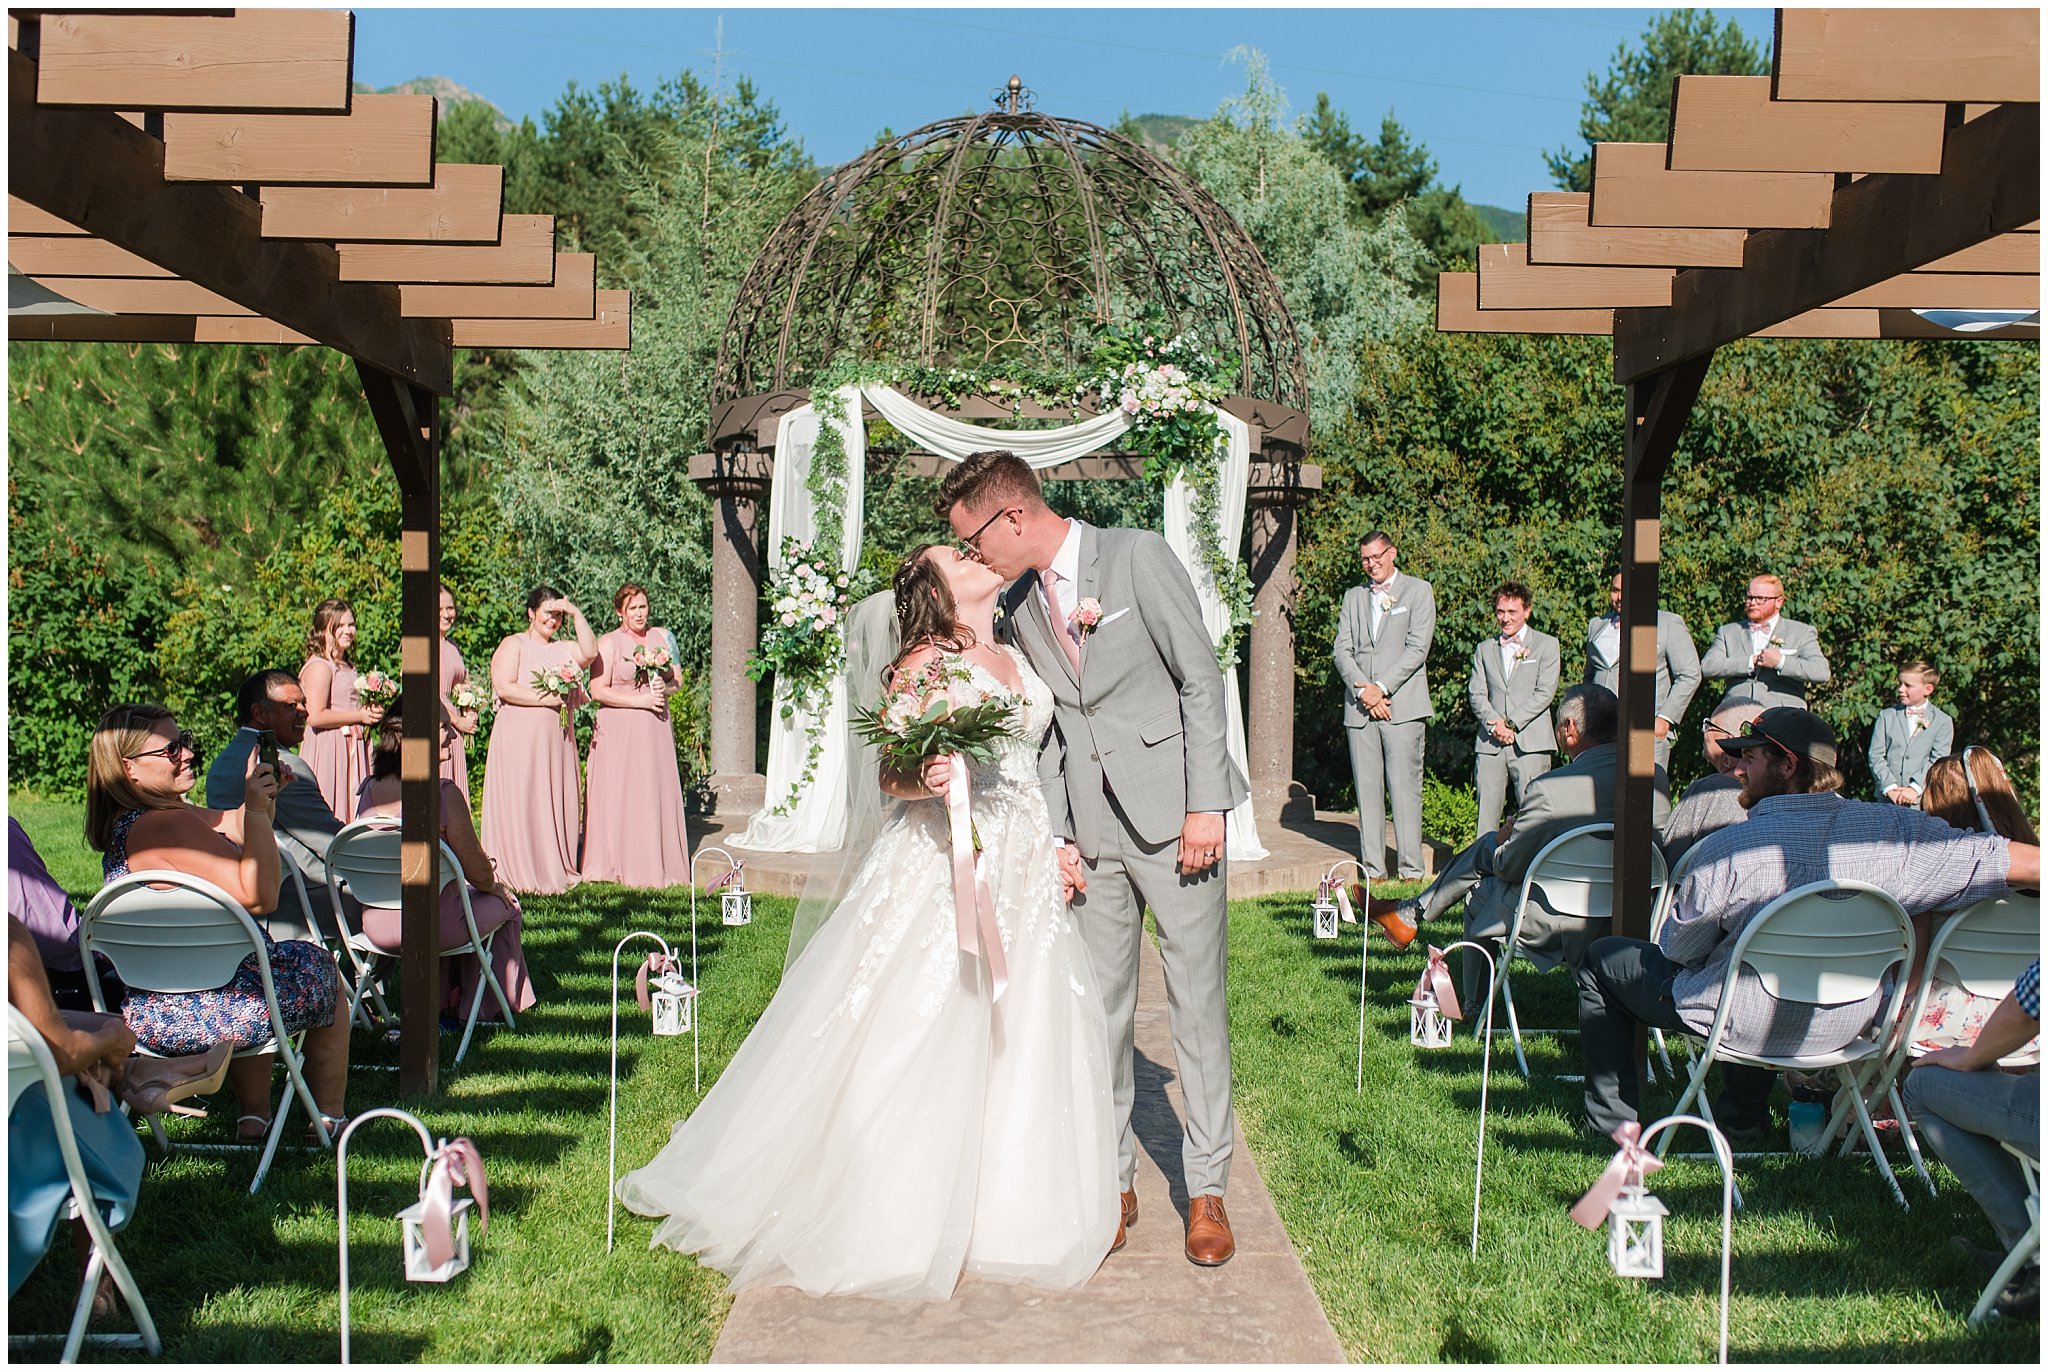 Bride and groom kiss during ceremony | Oak Hills Utah Dusty Rose and Gray Summer Wedding | Jessie and Dallin Photography